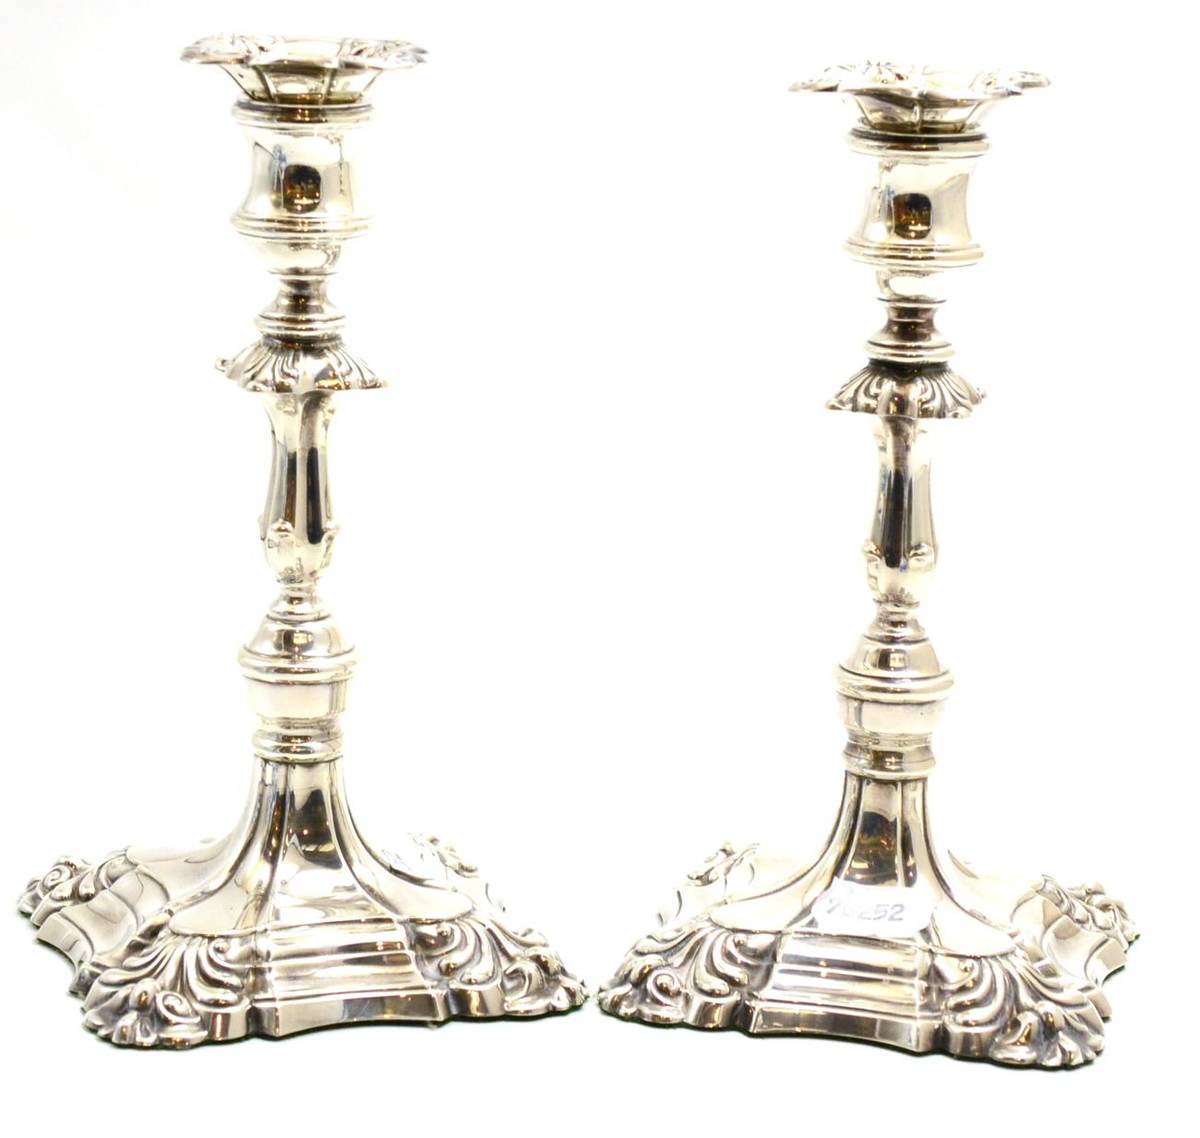 Lot 477 - A pair of 20th century silver candlesticks in the George II style, height 25cm